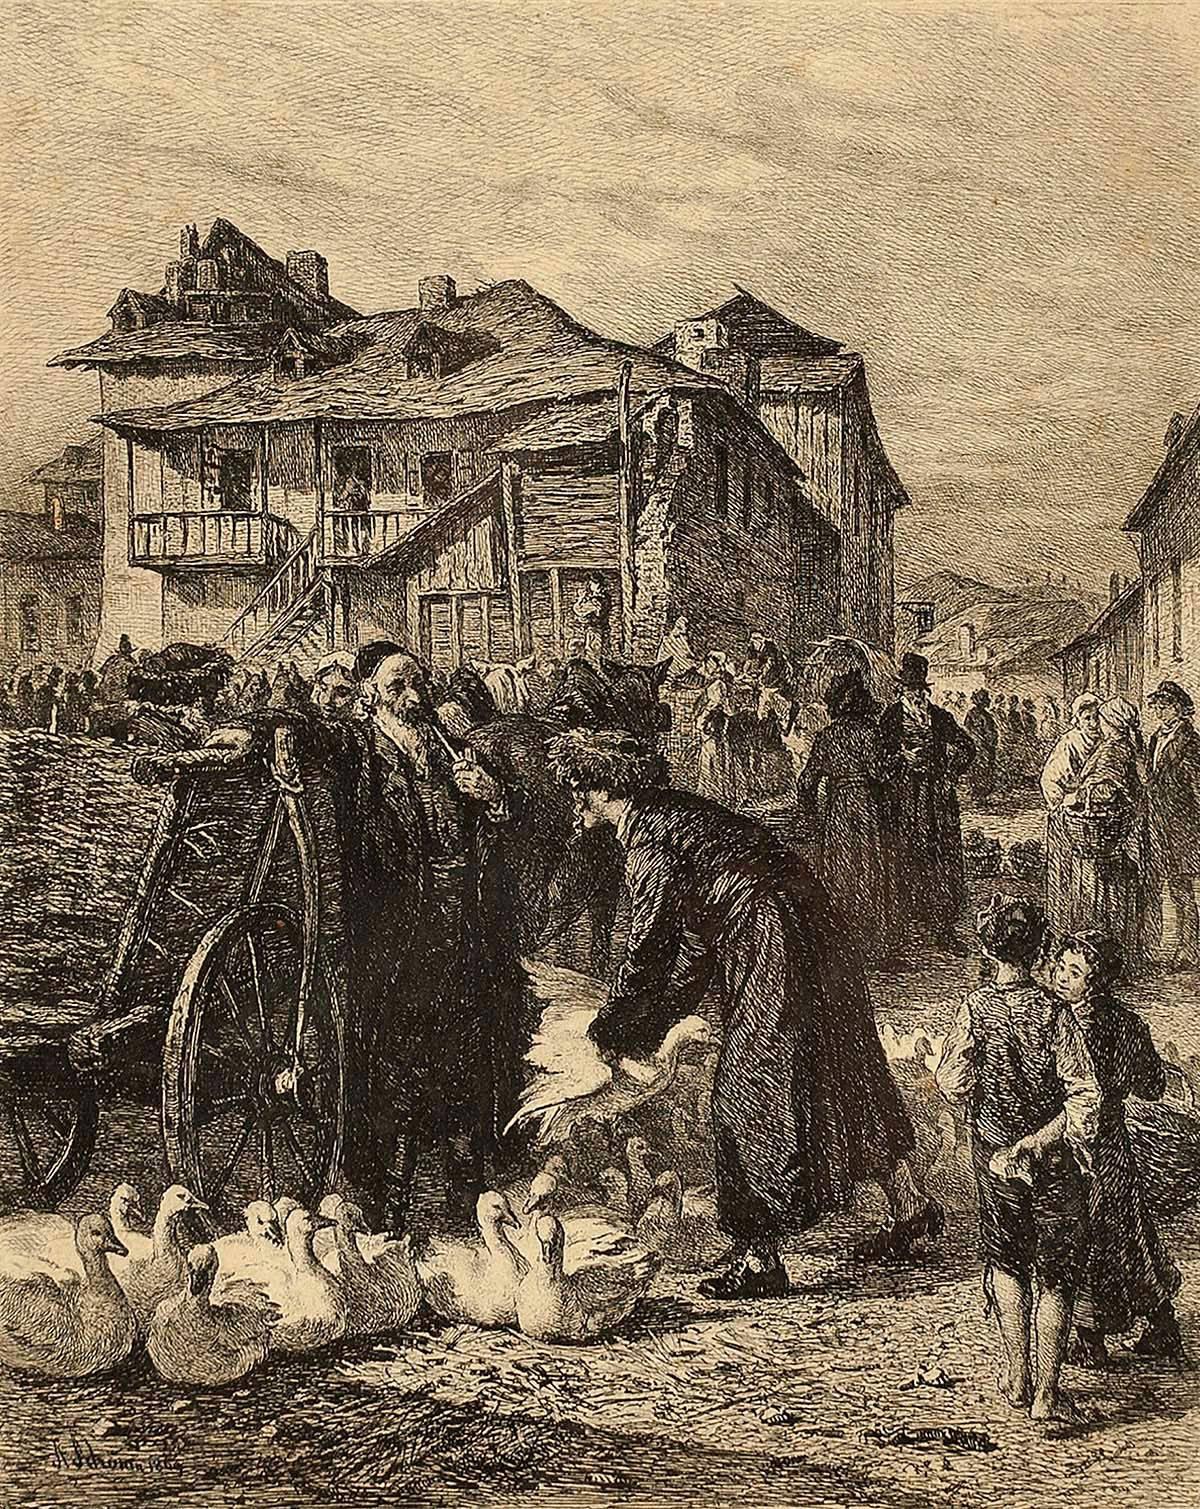 Goose-Market in Cracow, Vintage Print, 1869